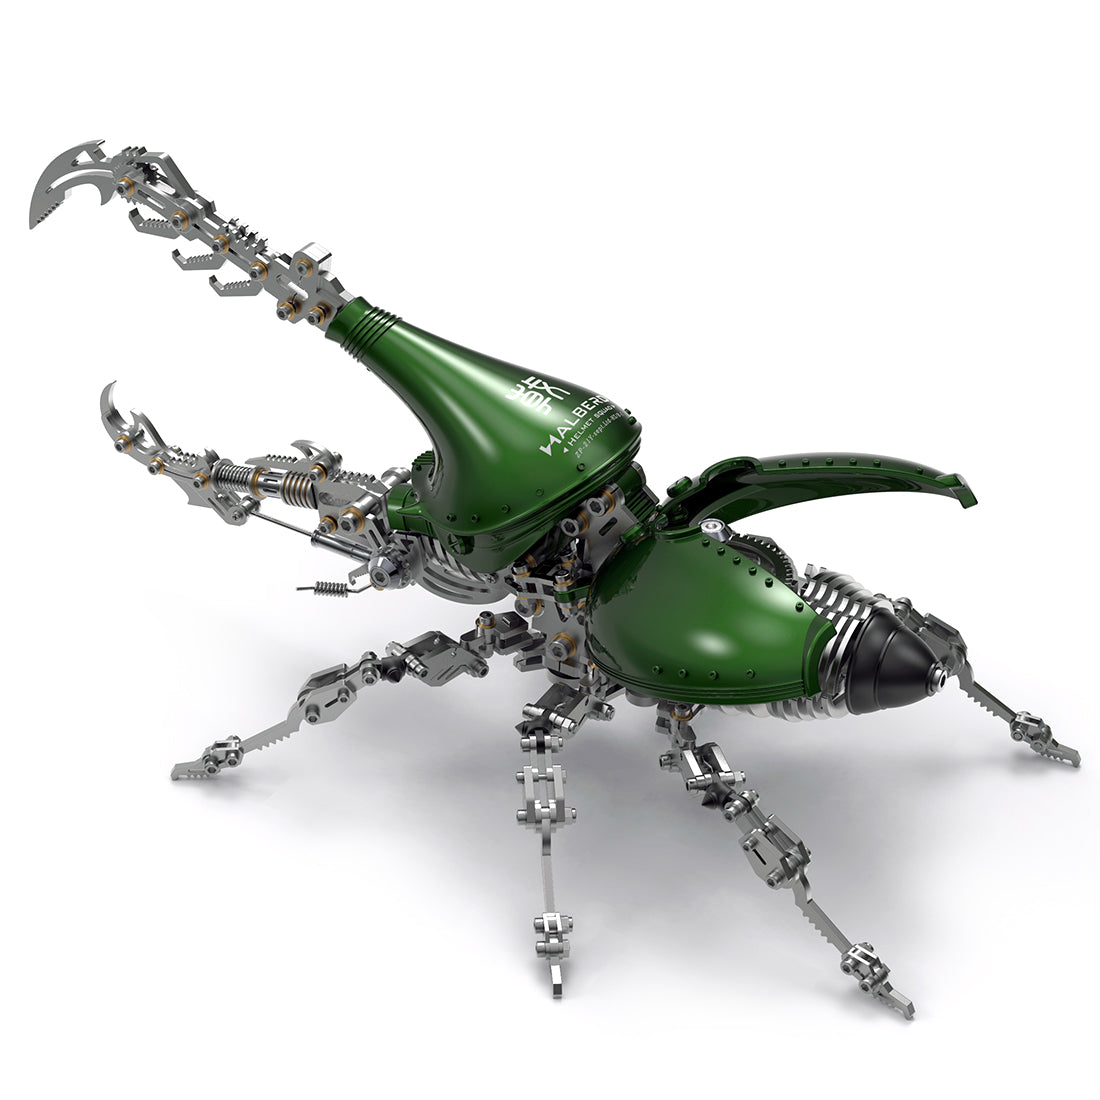 Large Dynastes Hercules Beetle with Long Horn 3D Metal Model Kits Assembly Insect